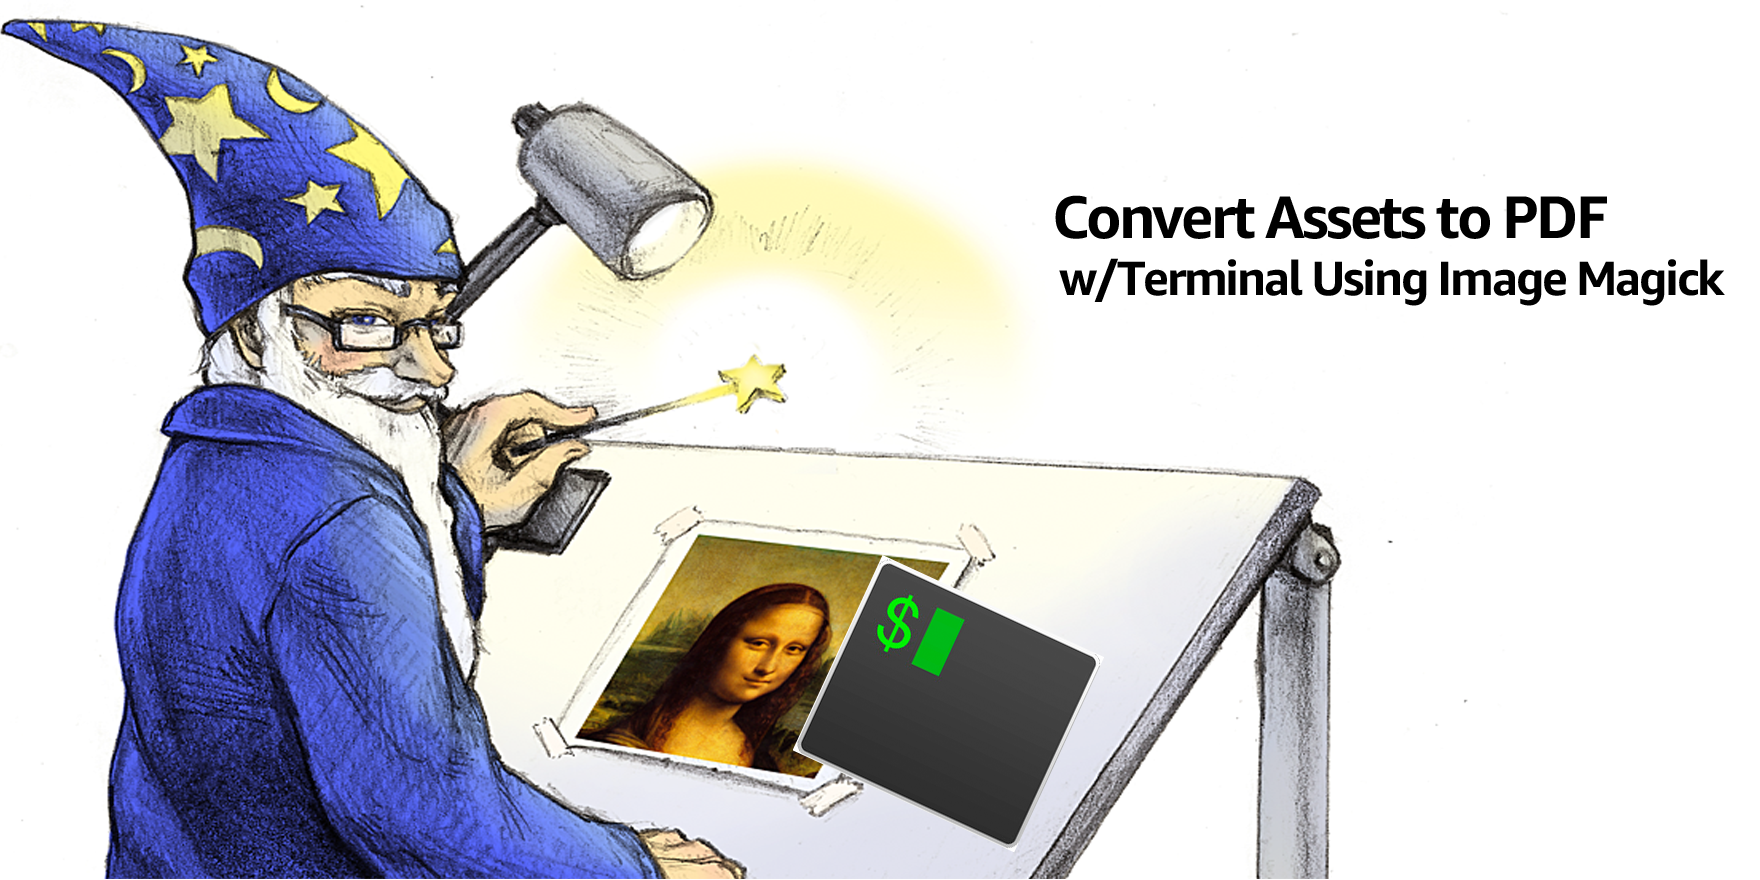 Learn more about Convert Assets to PDF with Terminal